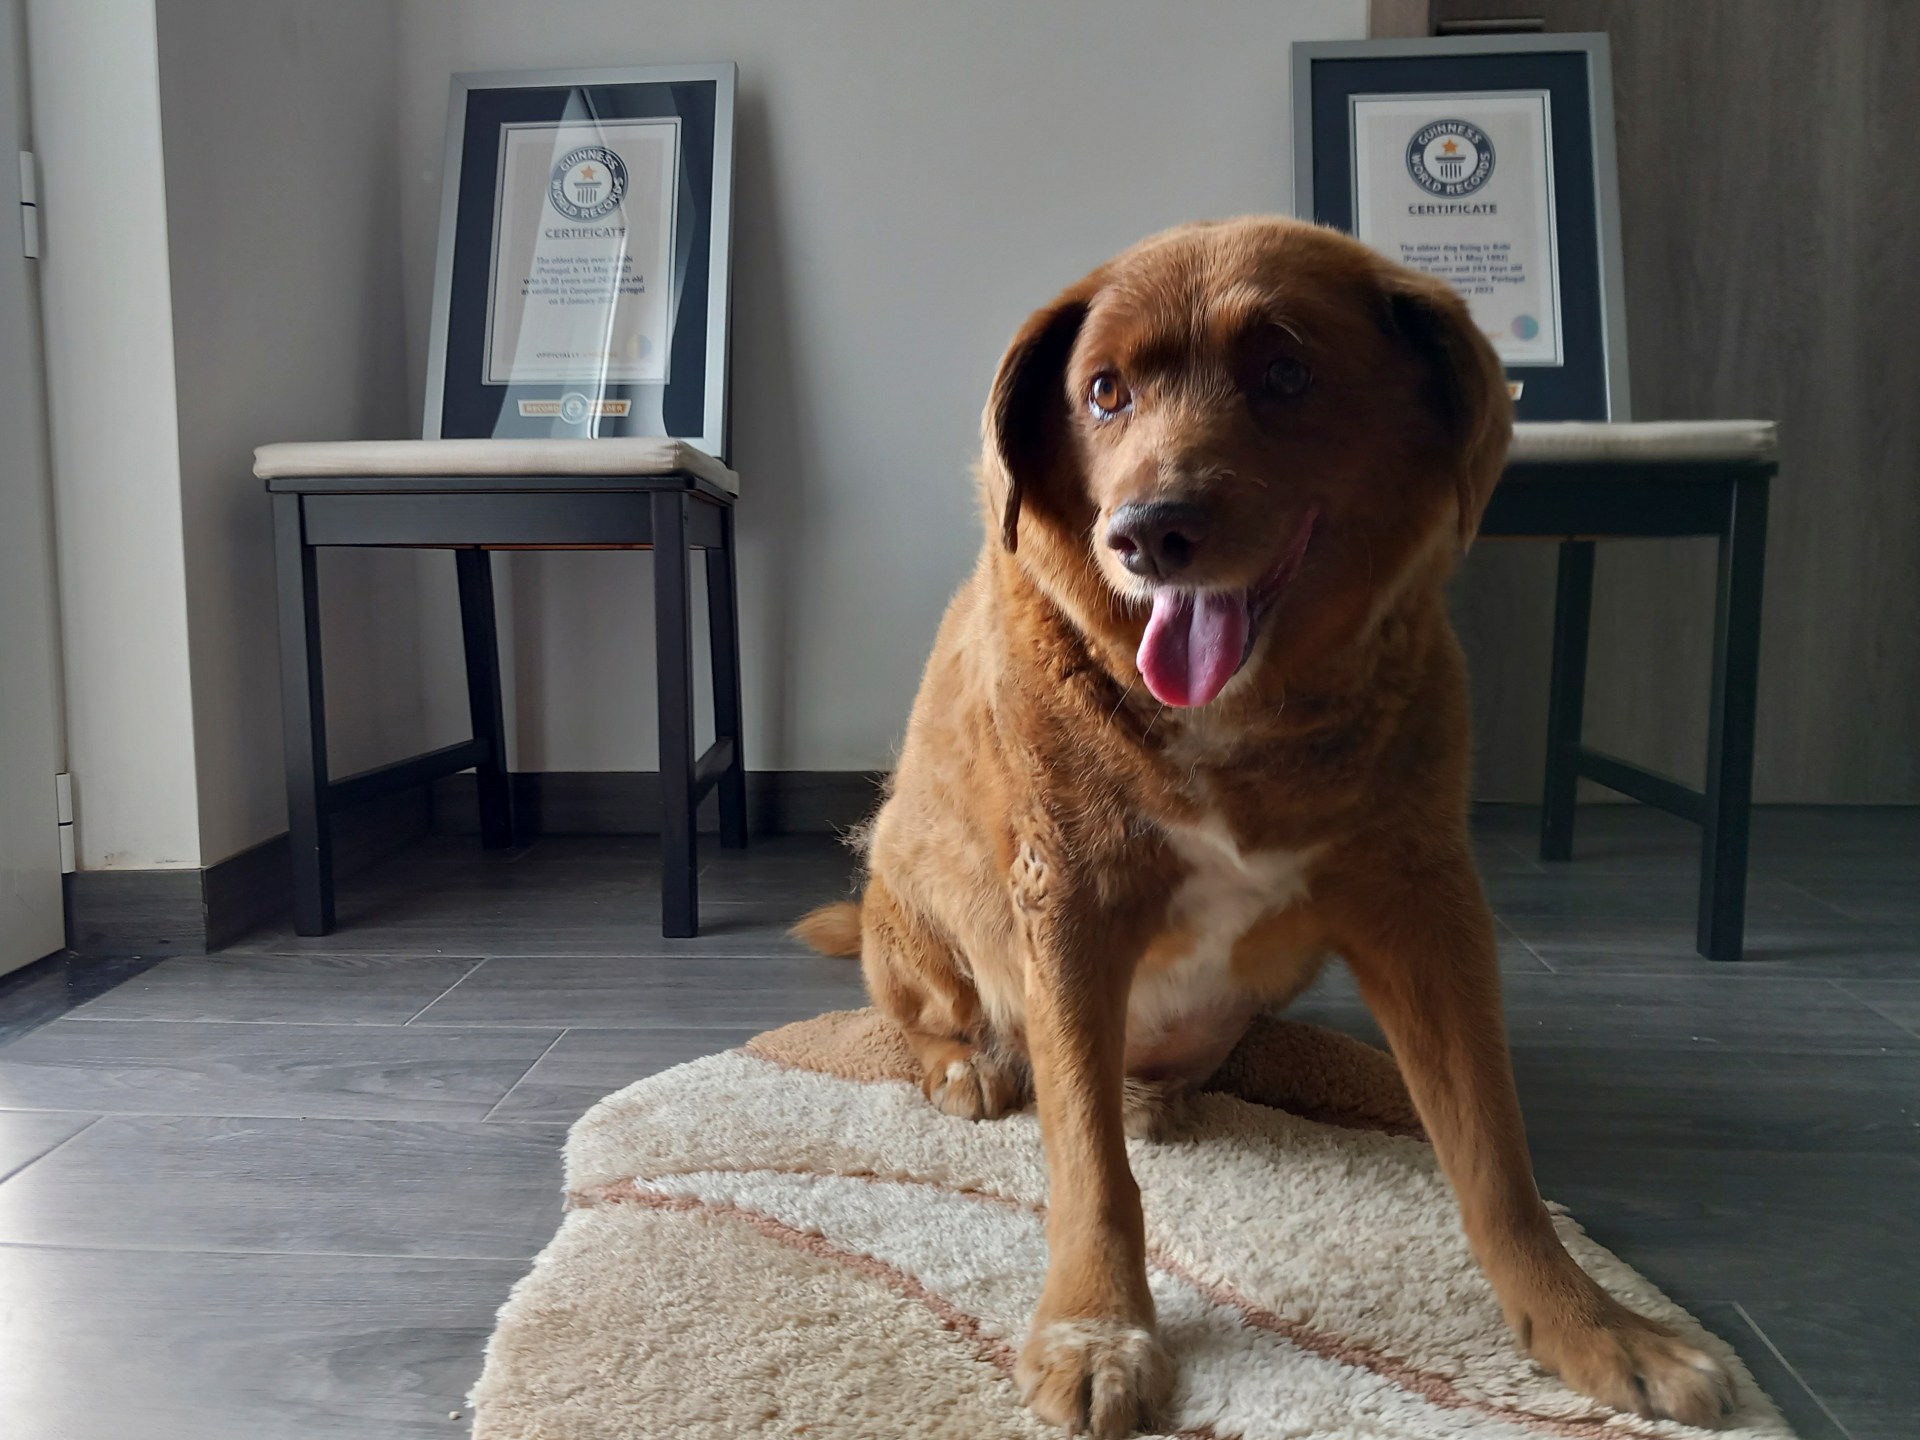 Guinness World Records reviews evidence related to ‘oldest dog’ title | News